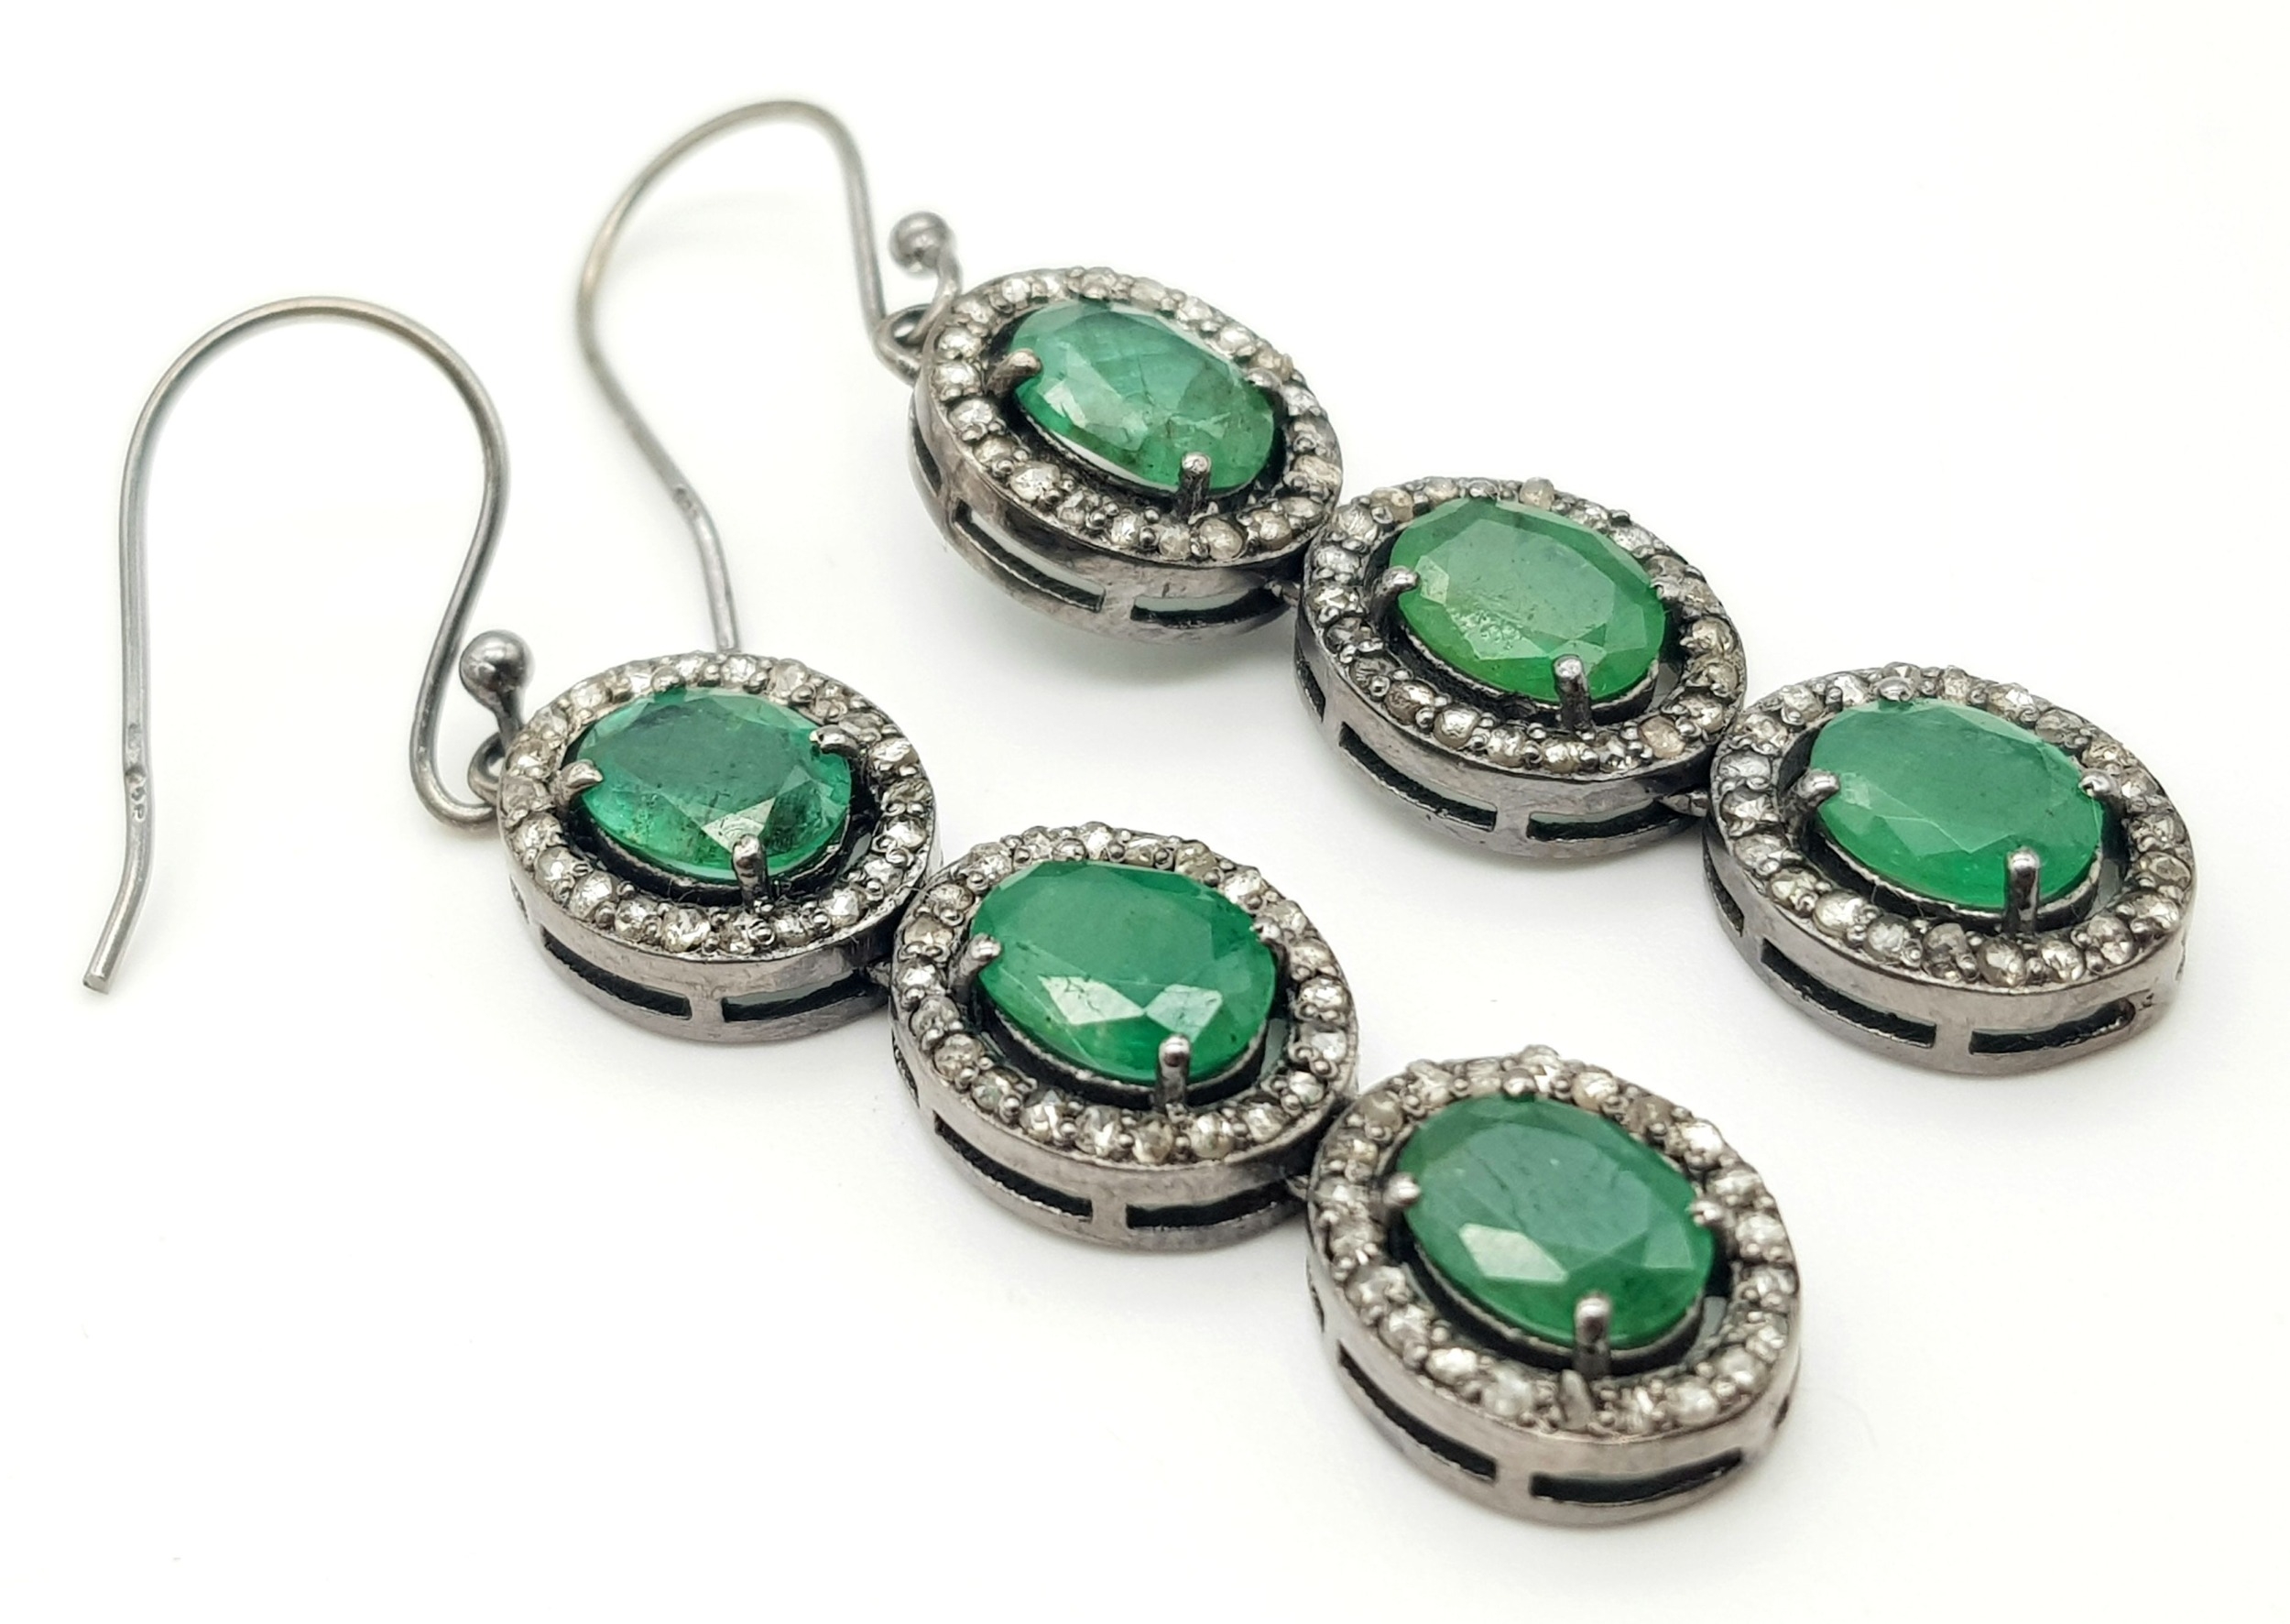 A Pair of Emerald Gemstone Drop Earrings with Halos of Diamonds. Set in 925 Silver. Emeralds -